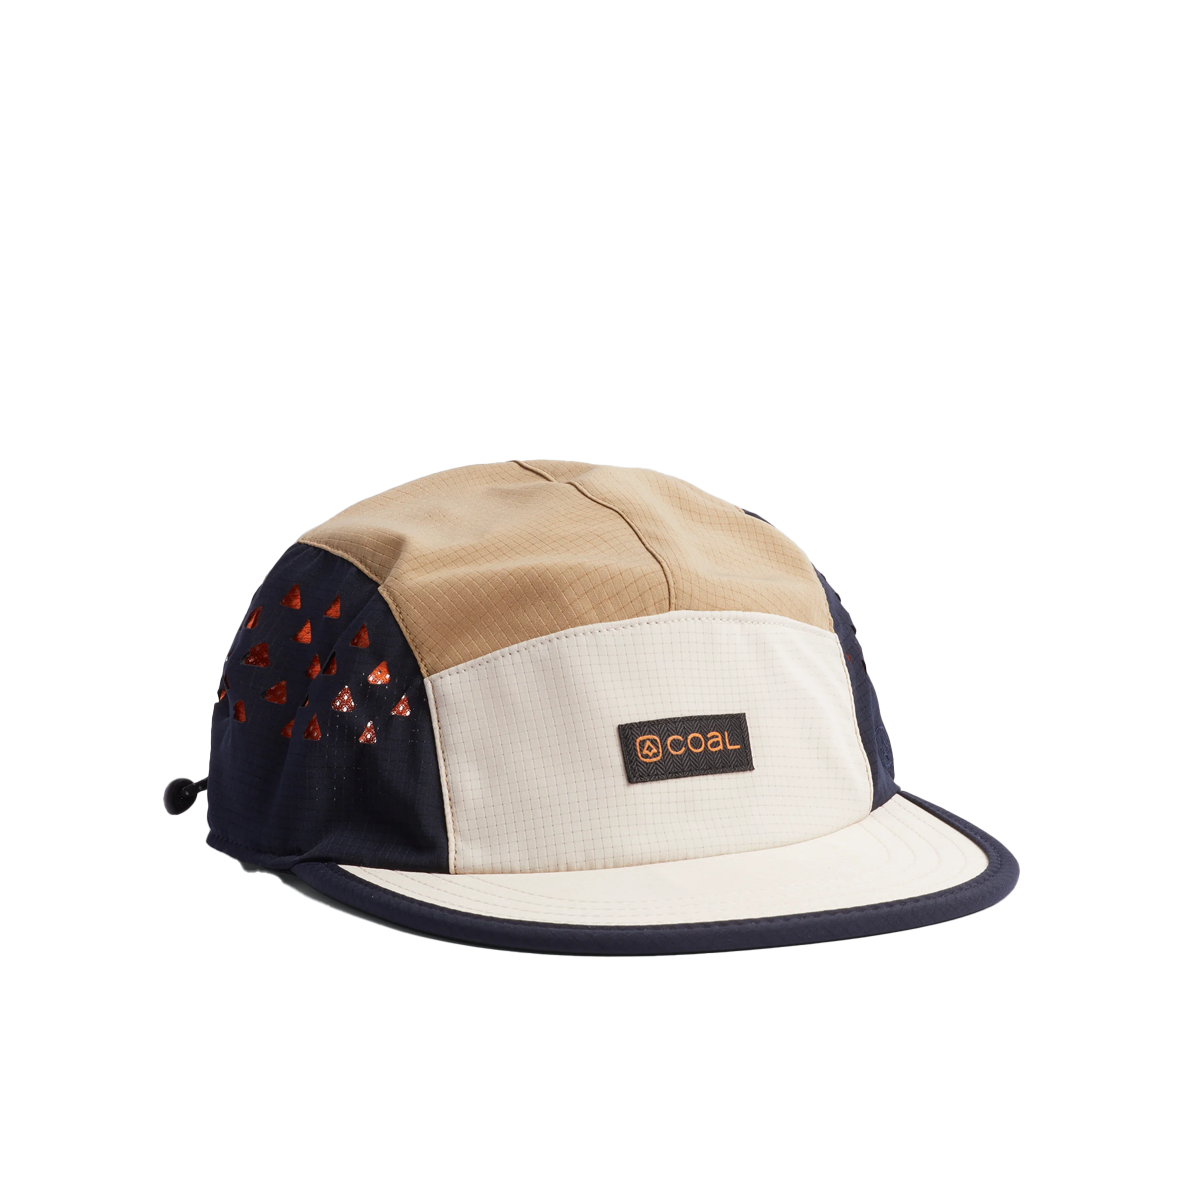 Coal The Provo UPF Tech 5-Panel Hat - Assorted Colors